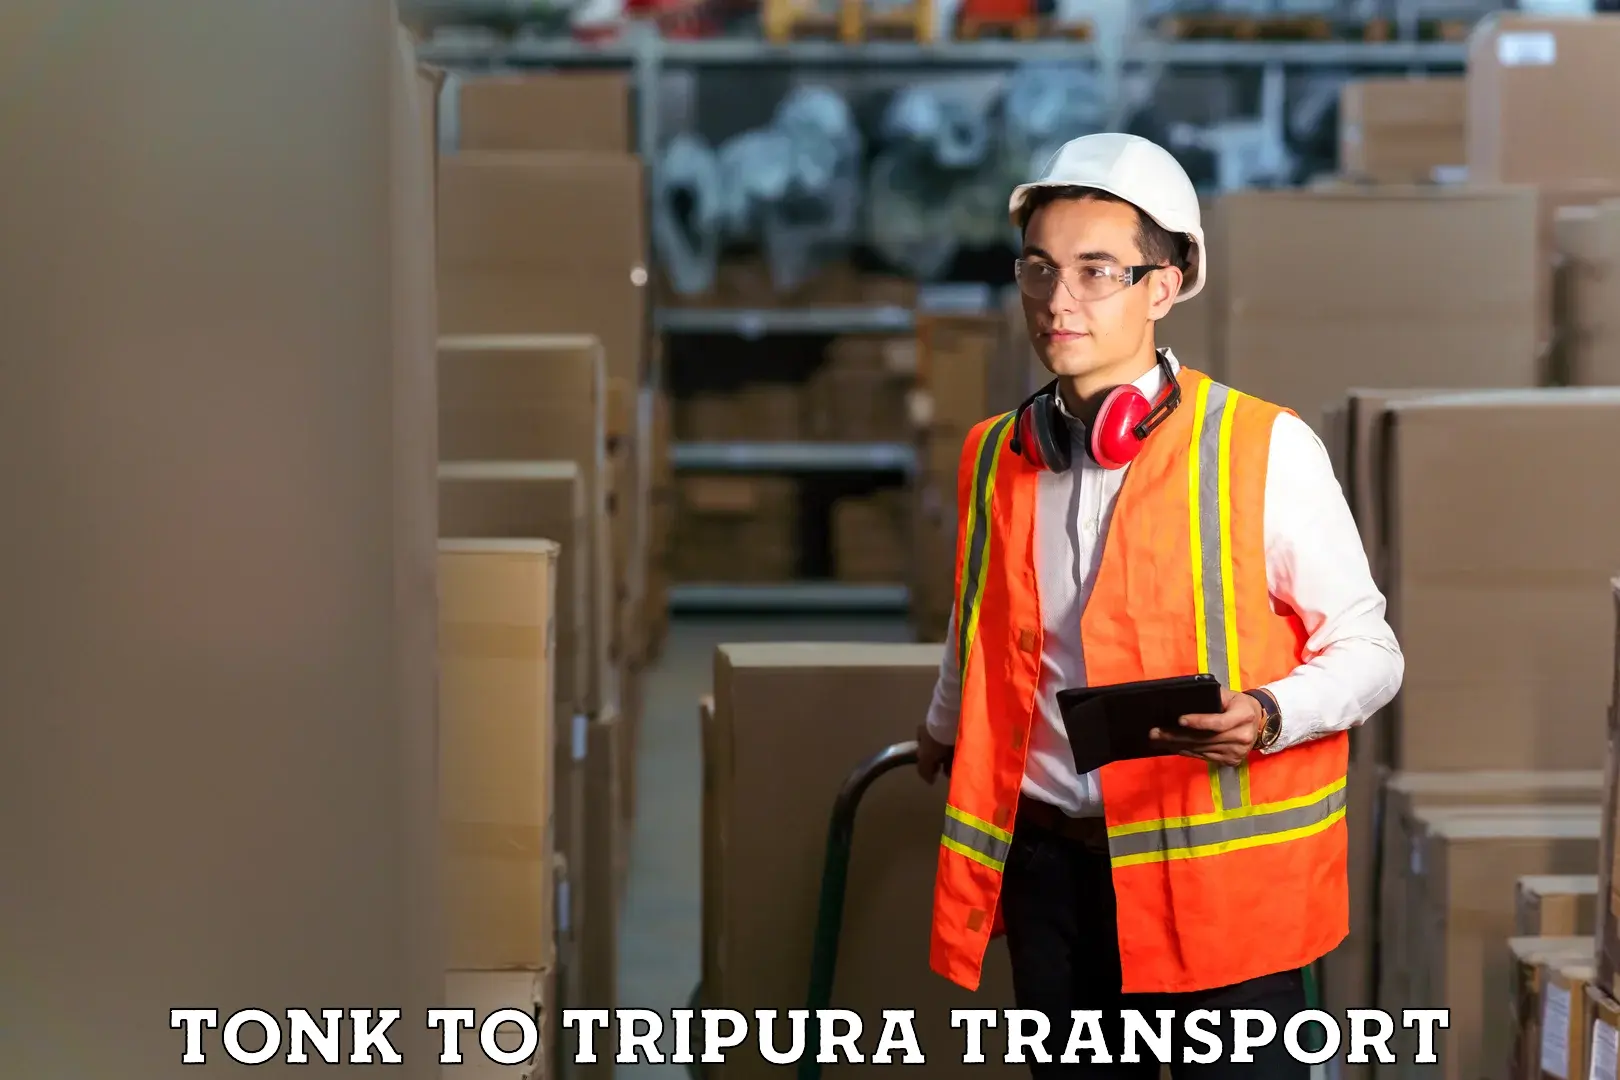 Express transport services Tonk to Udaipur Tripura